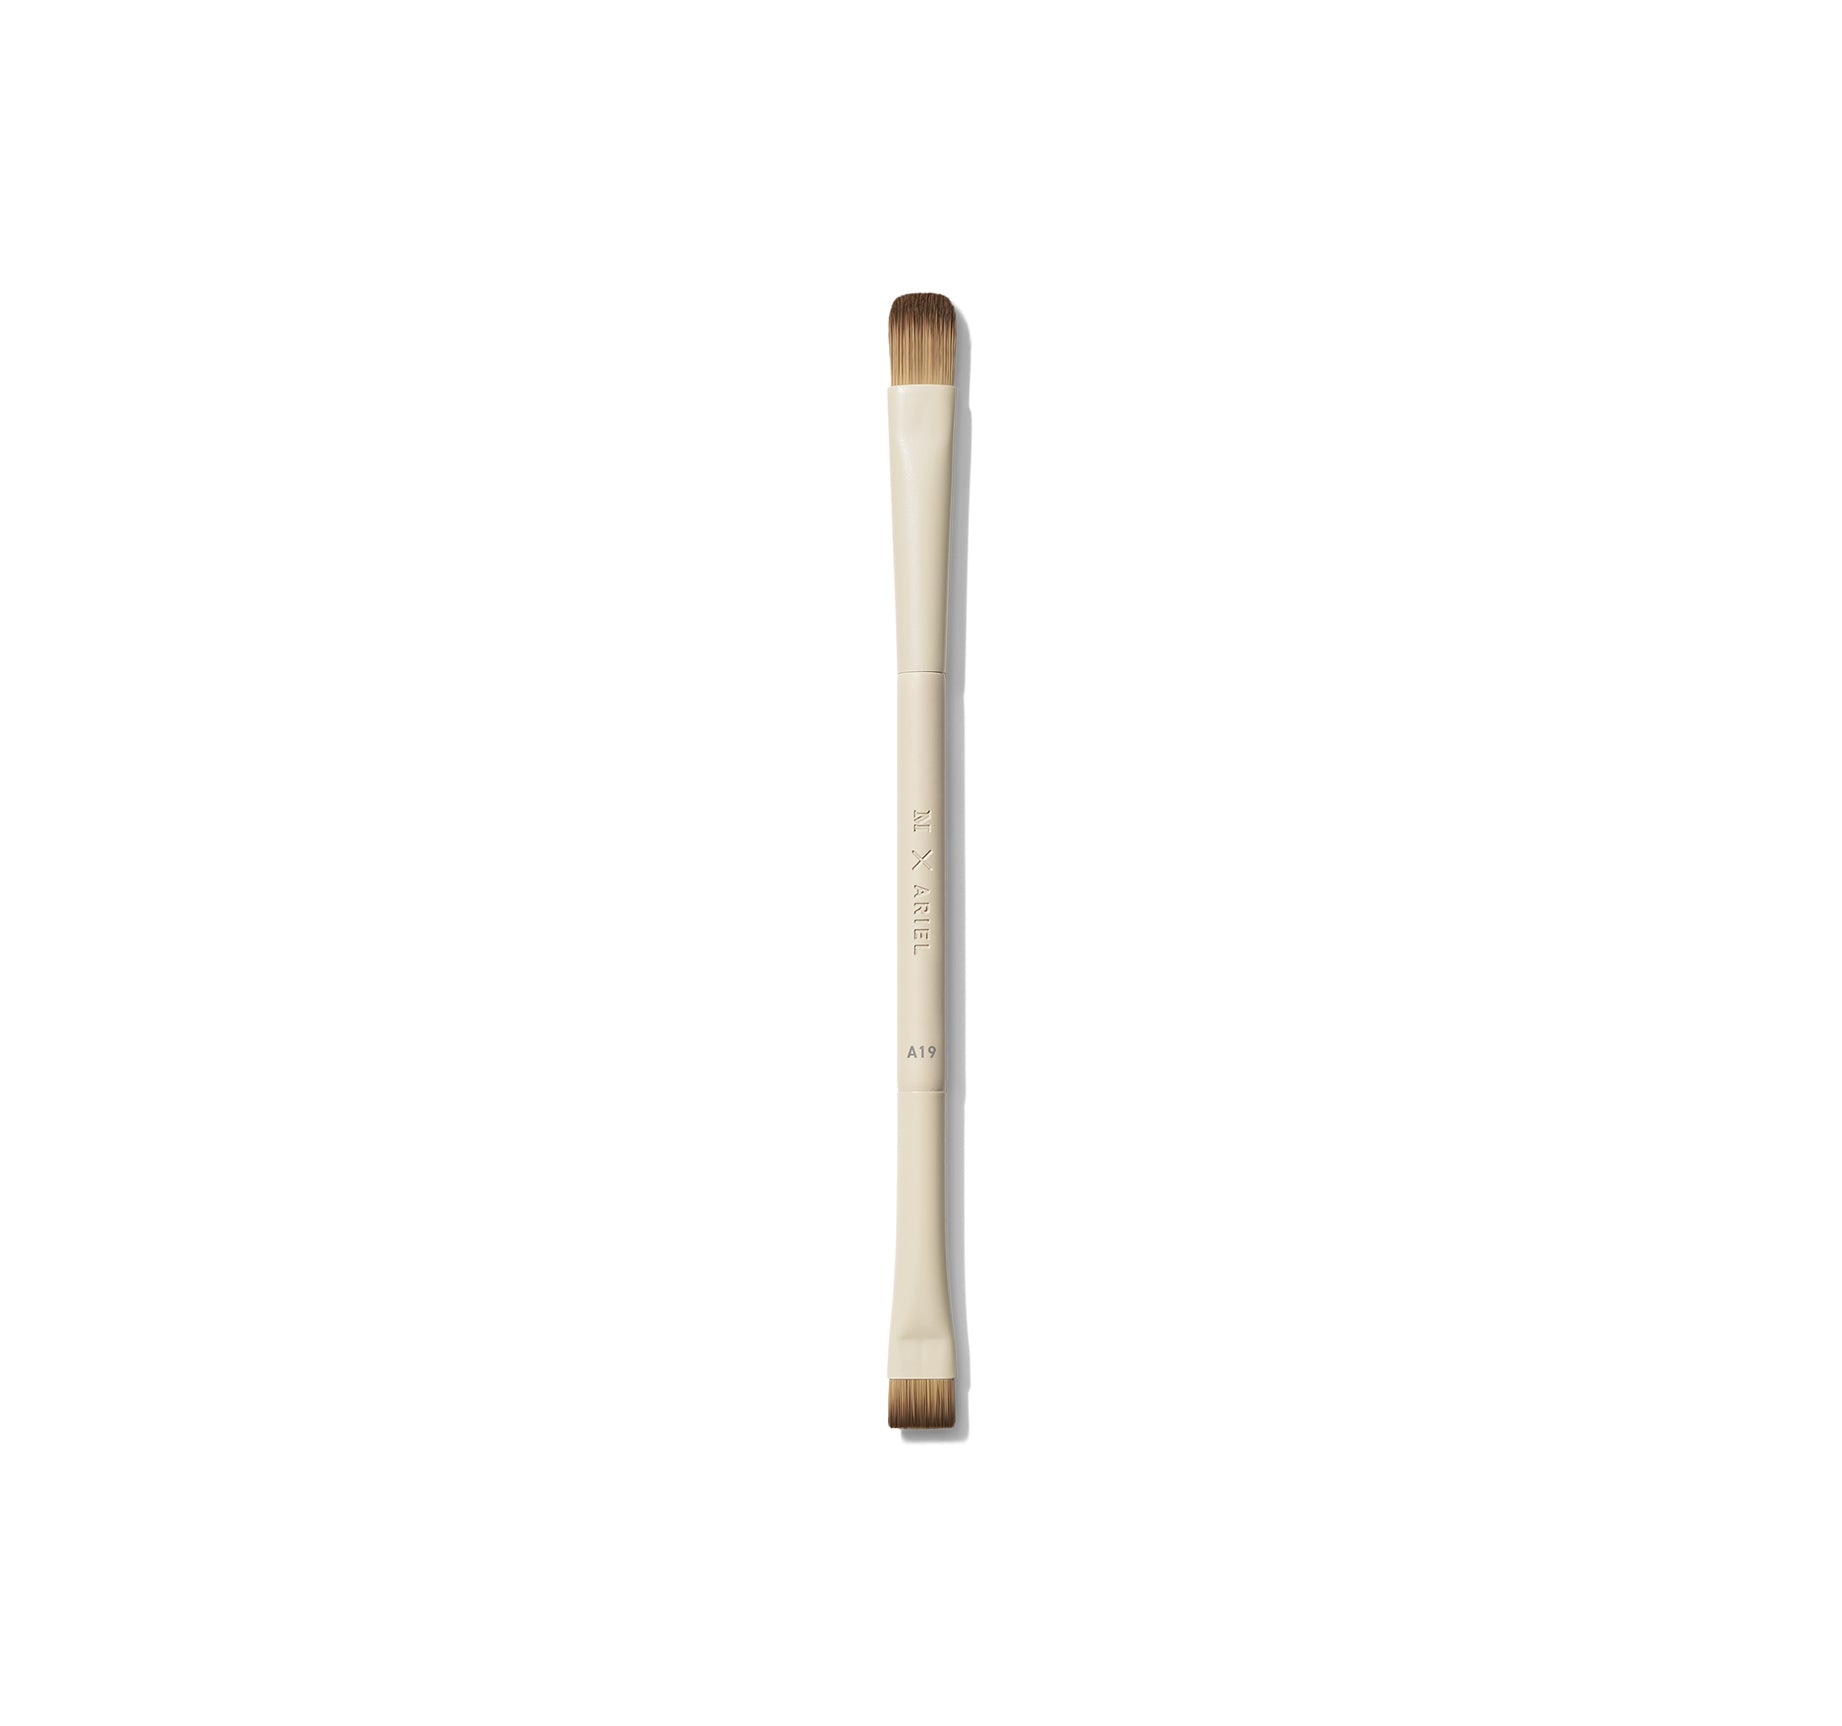 Morphe X Ariel A19 Signature Dual-Ended Concealer Brush - Image 1